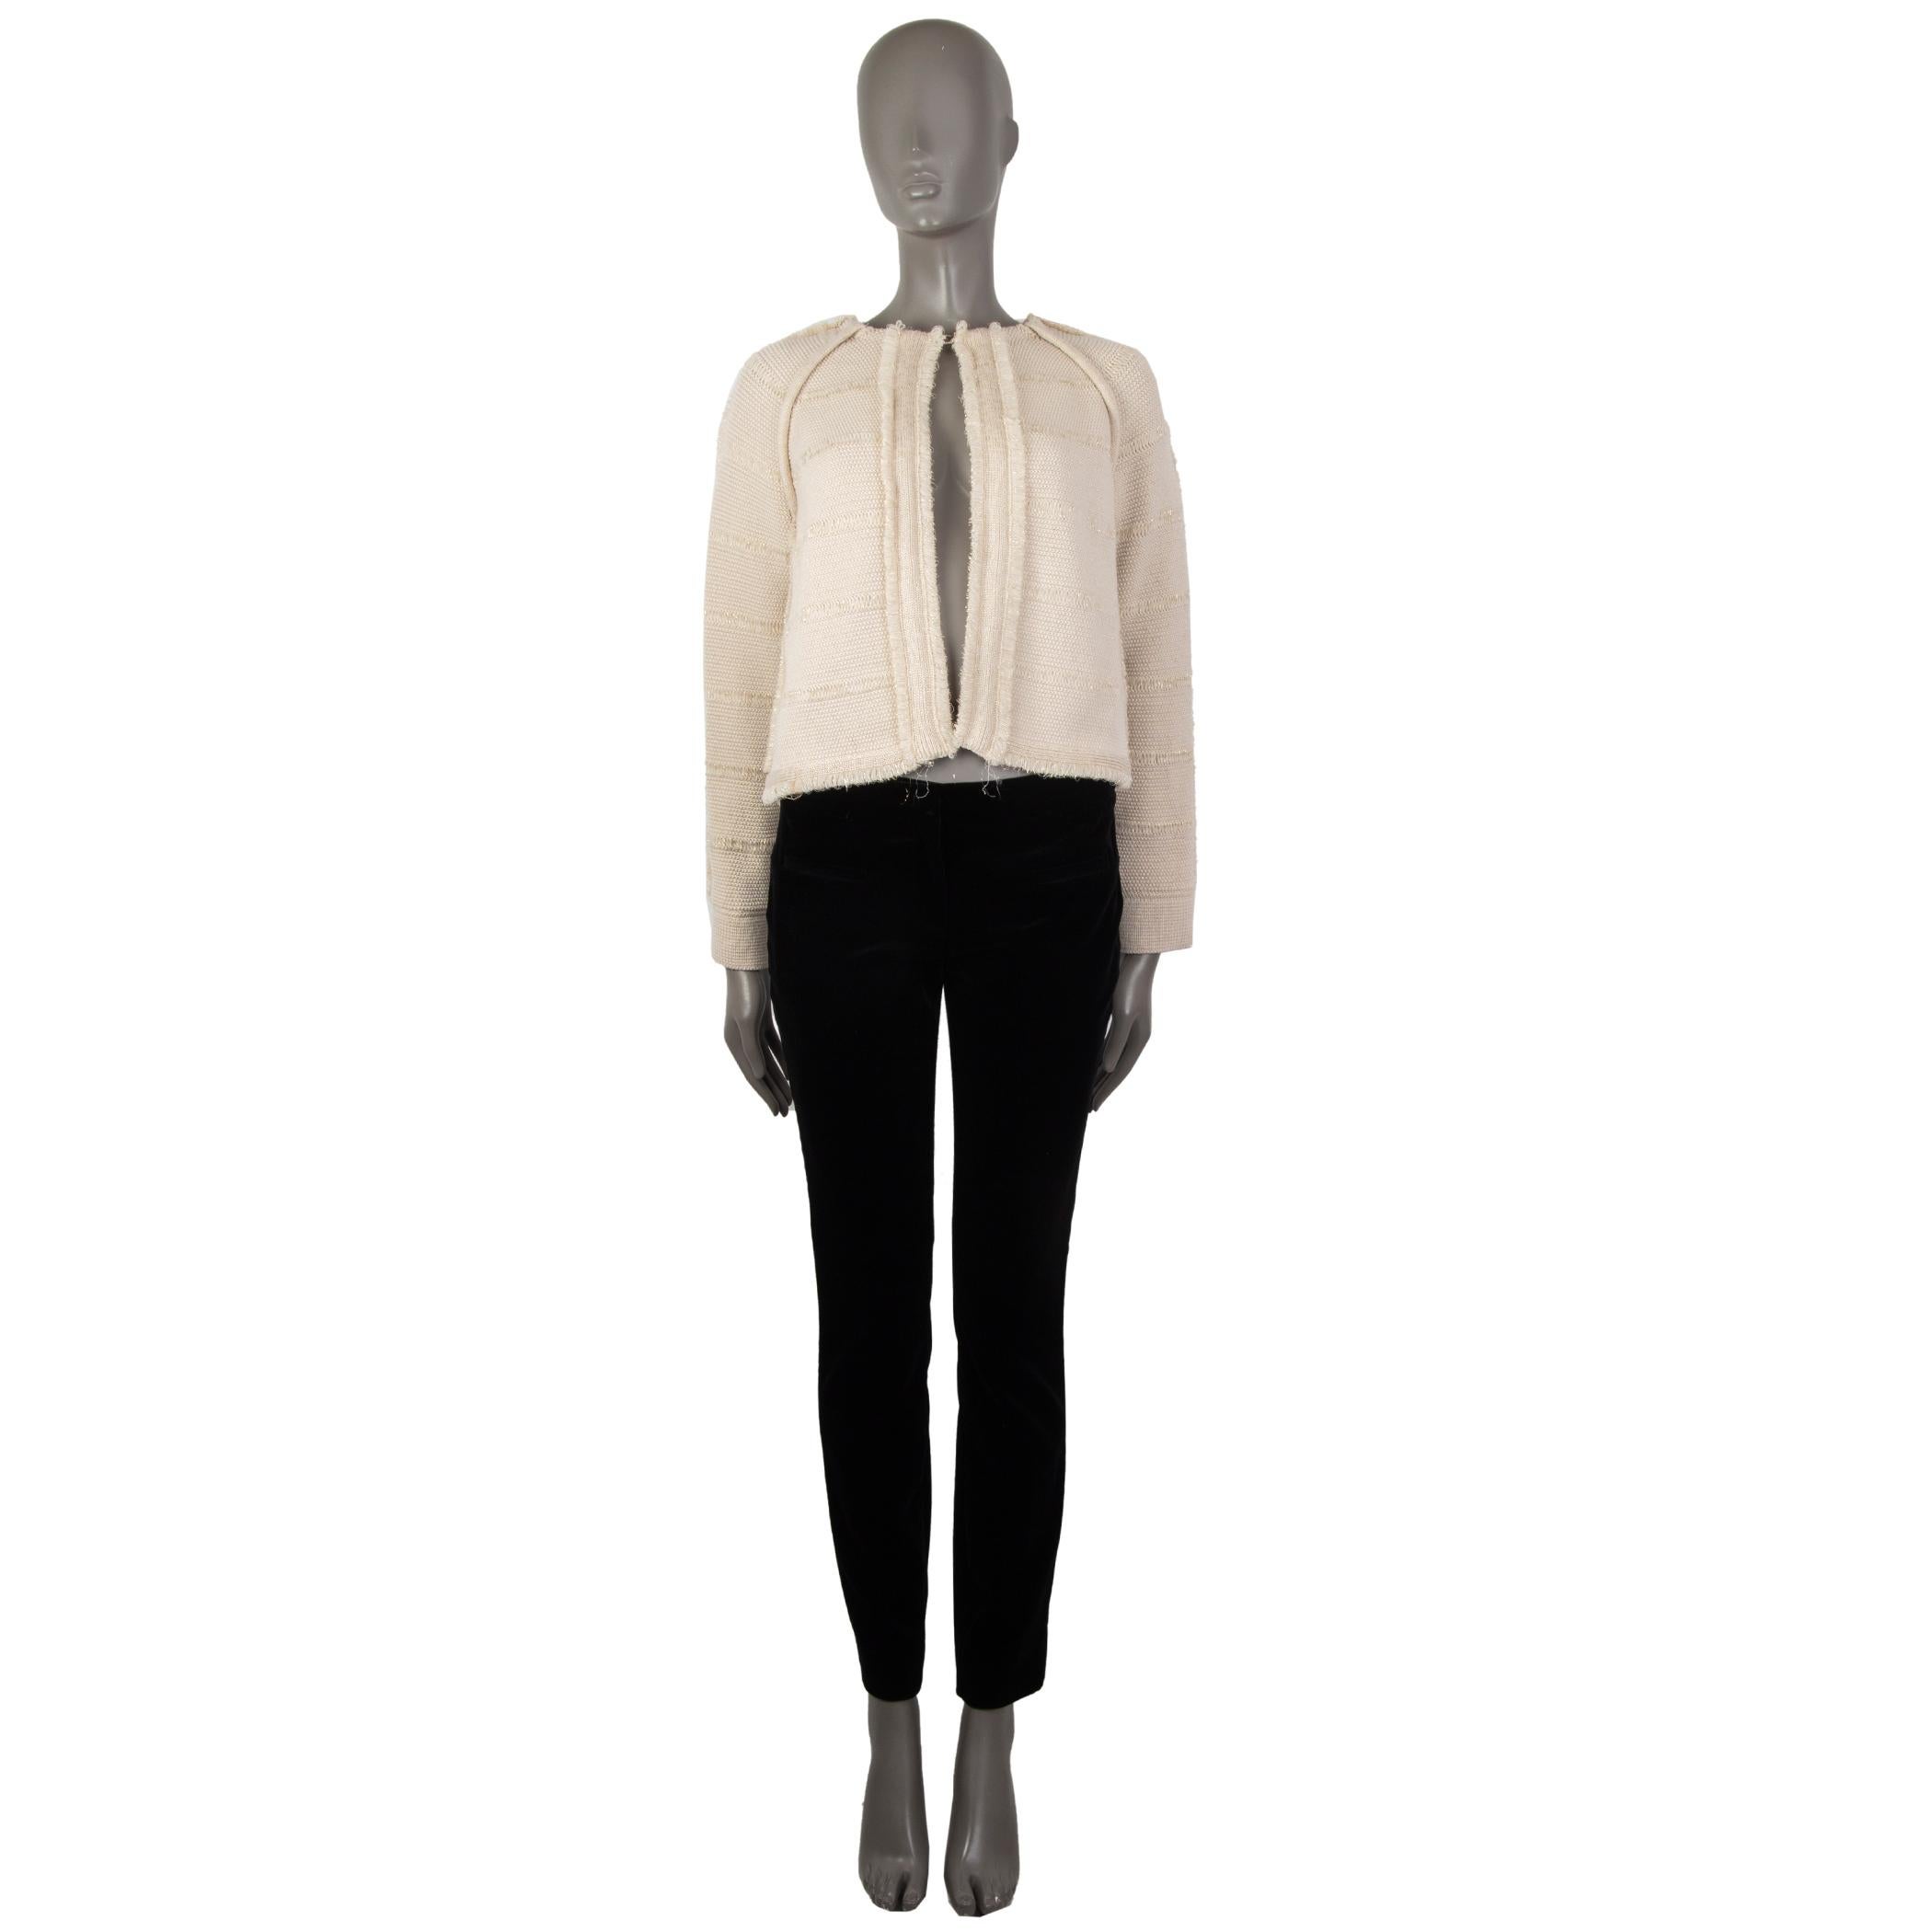 authentic Chloé fringe-trim lamé cardigan in cream and gold wool (68%) viscose (26%) polyester (6%) with raglan sleeves, round collar, long sleeves, detailed with loose loops allover and along the trim. Closes with one button in the front. Unlined.